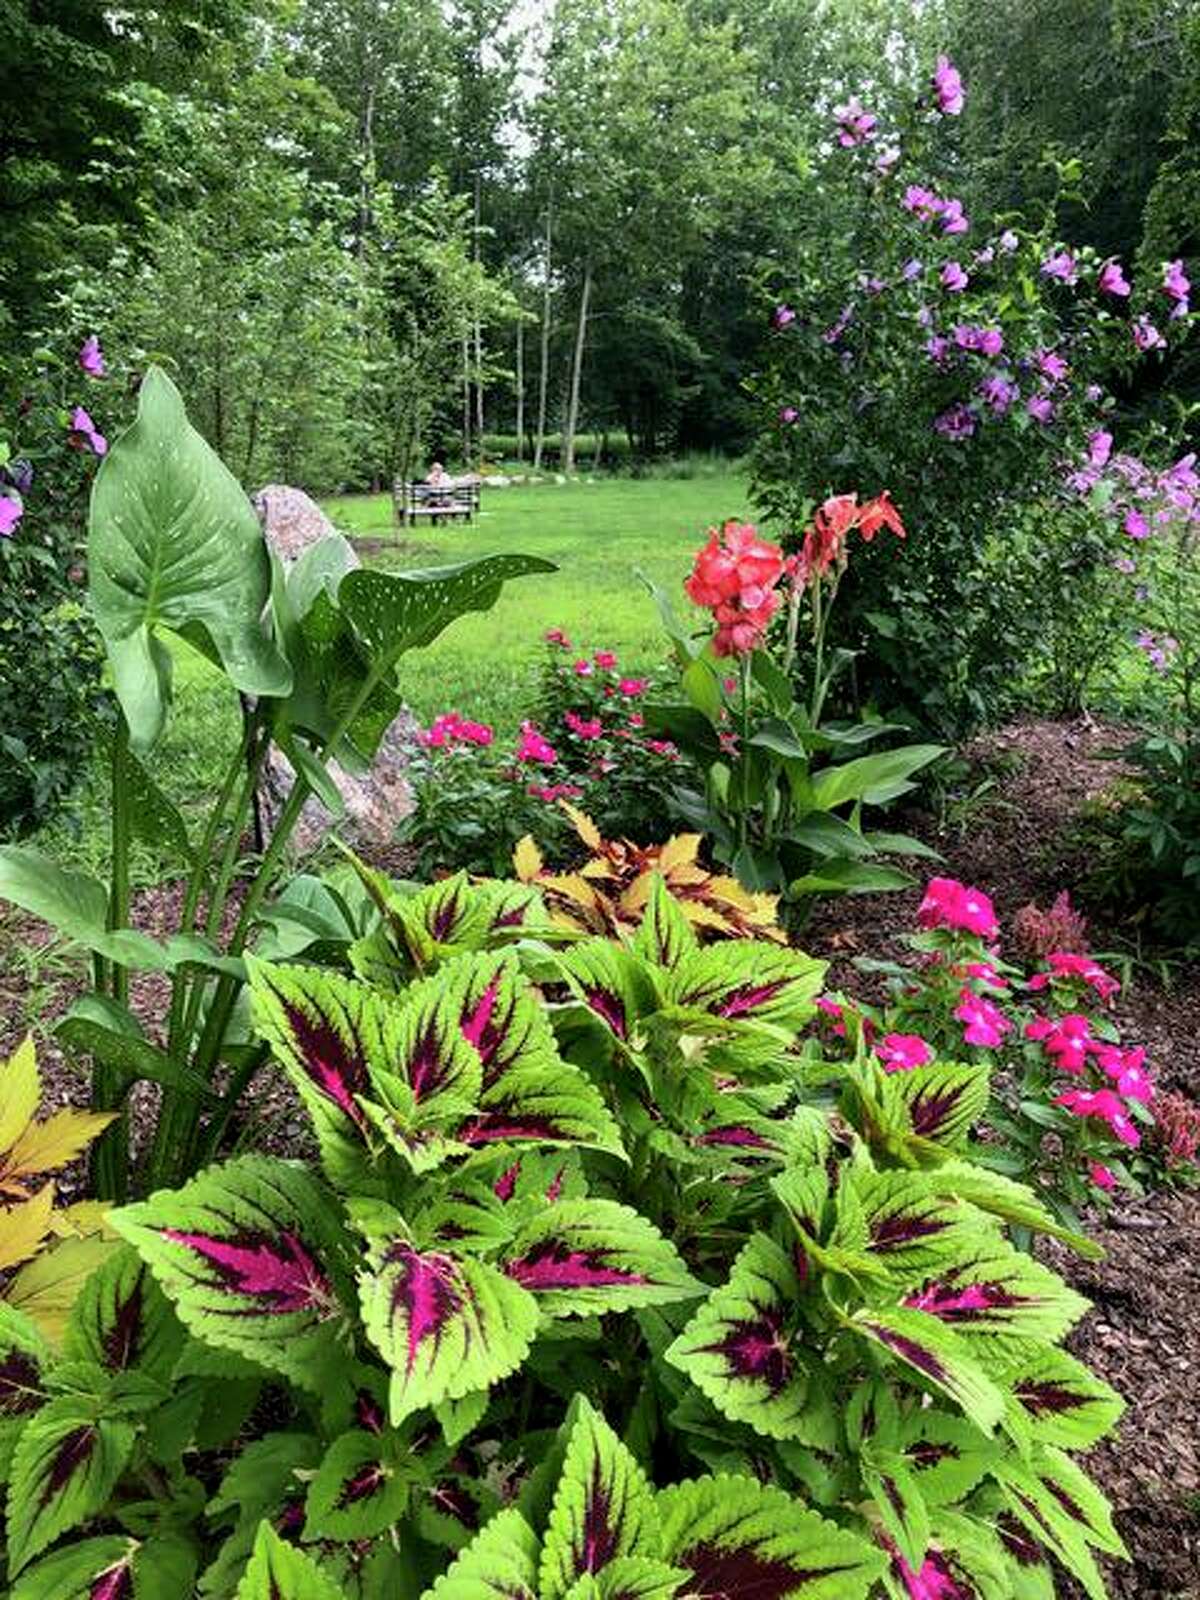 The garden planted and maintained by the Wilton Garden Club at the Chess Park on River Road offers a bucolic place to sit and a colorful view to those walking or driving by.